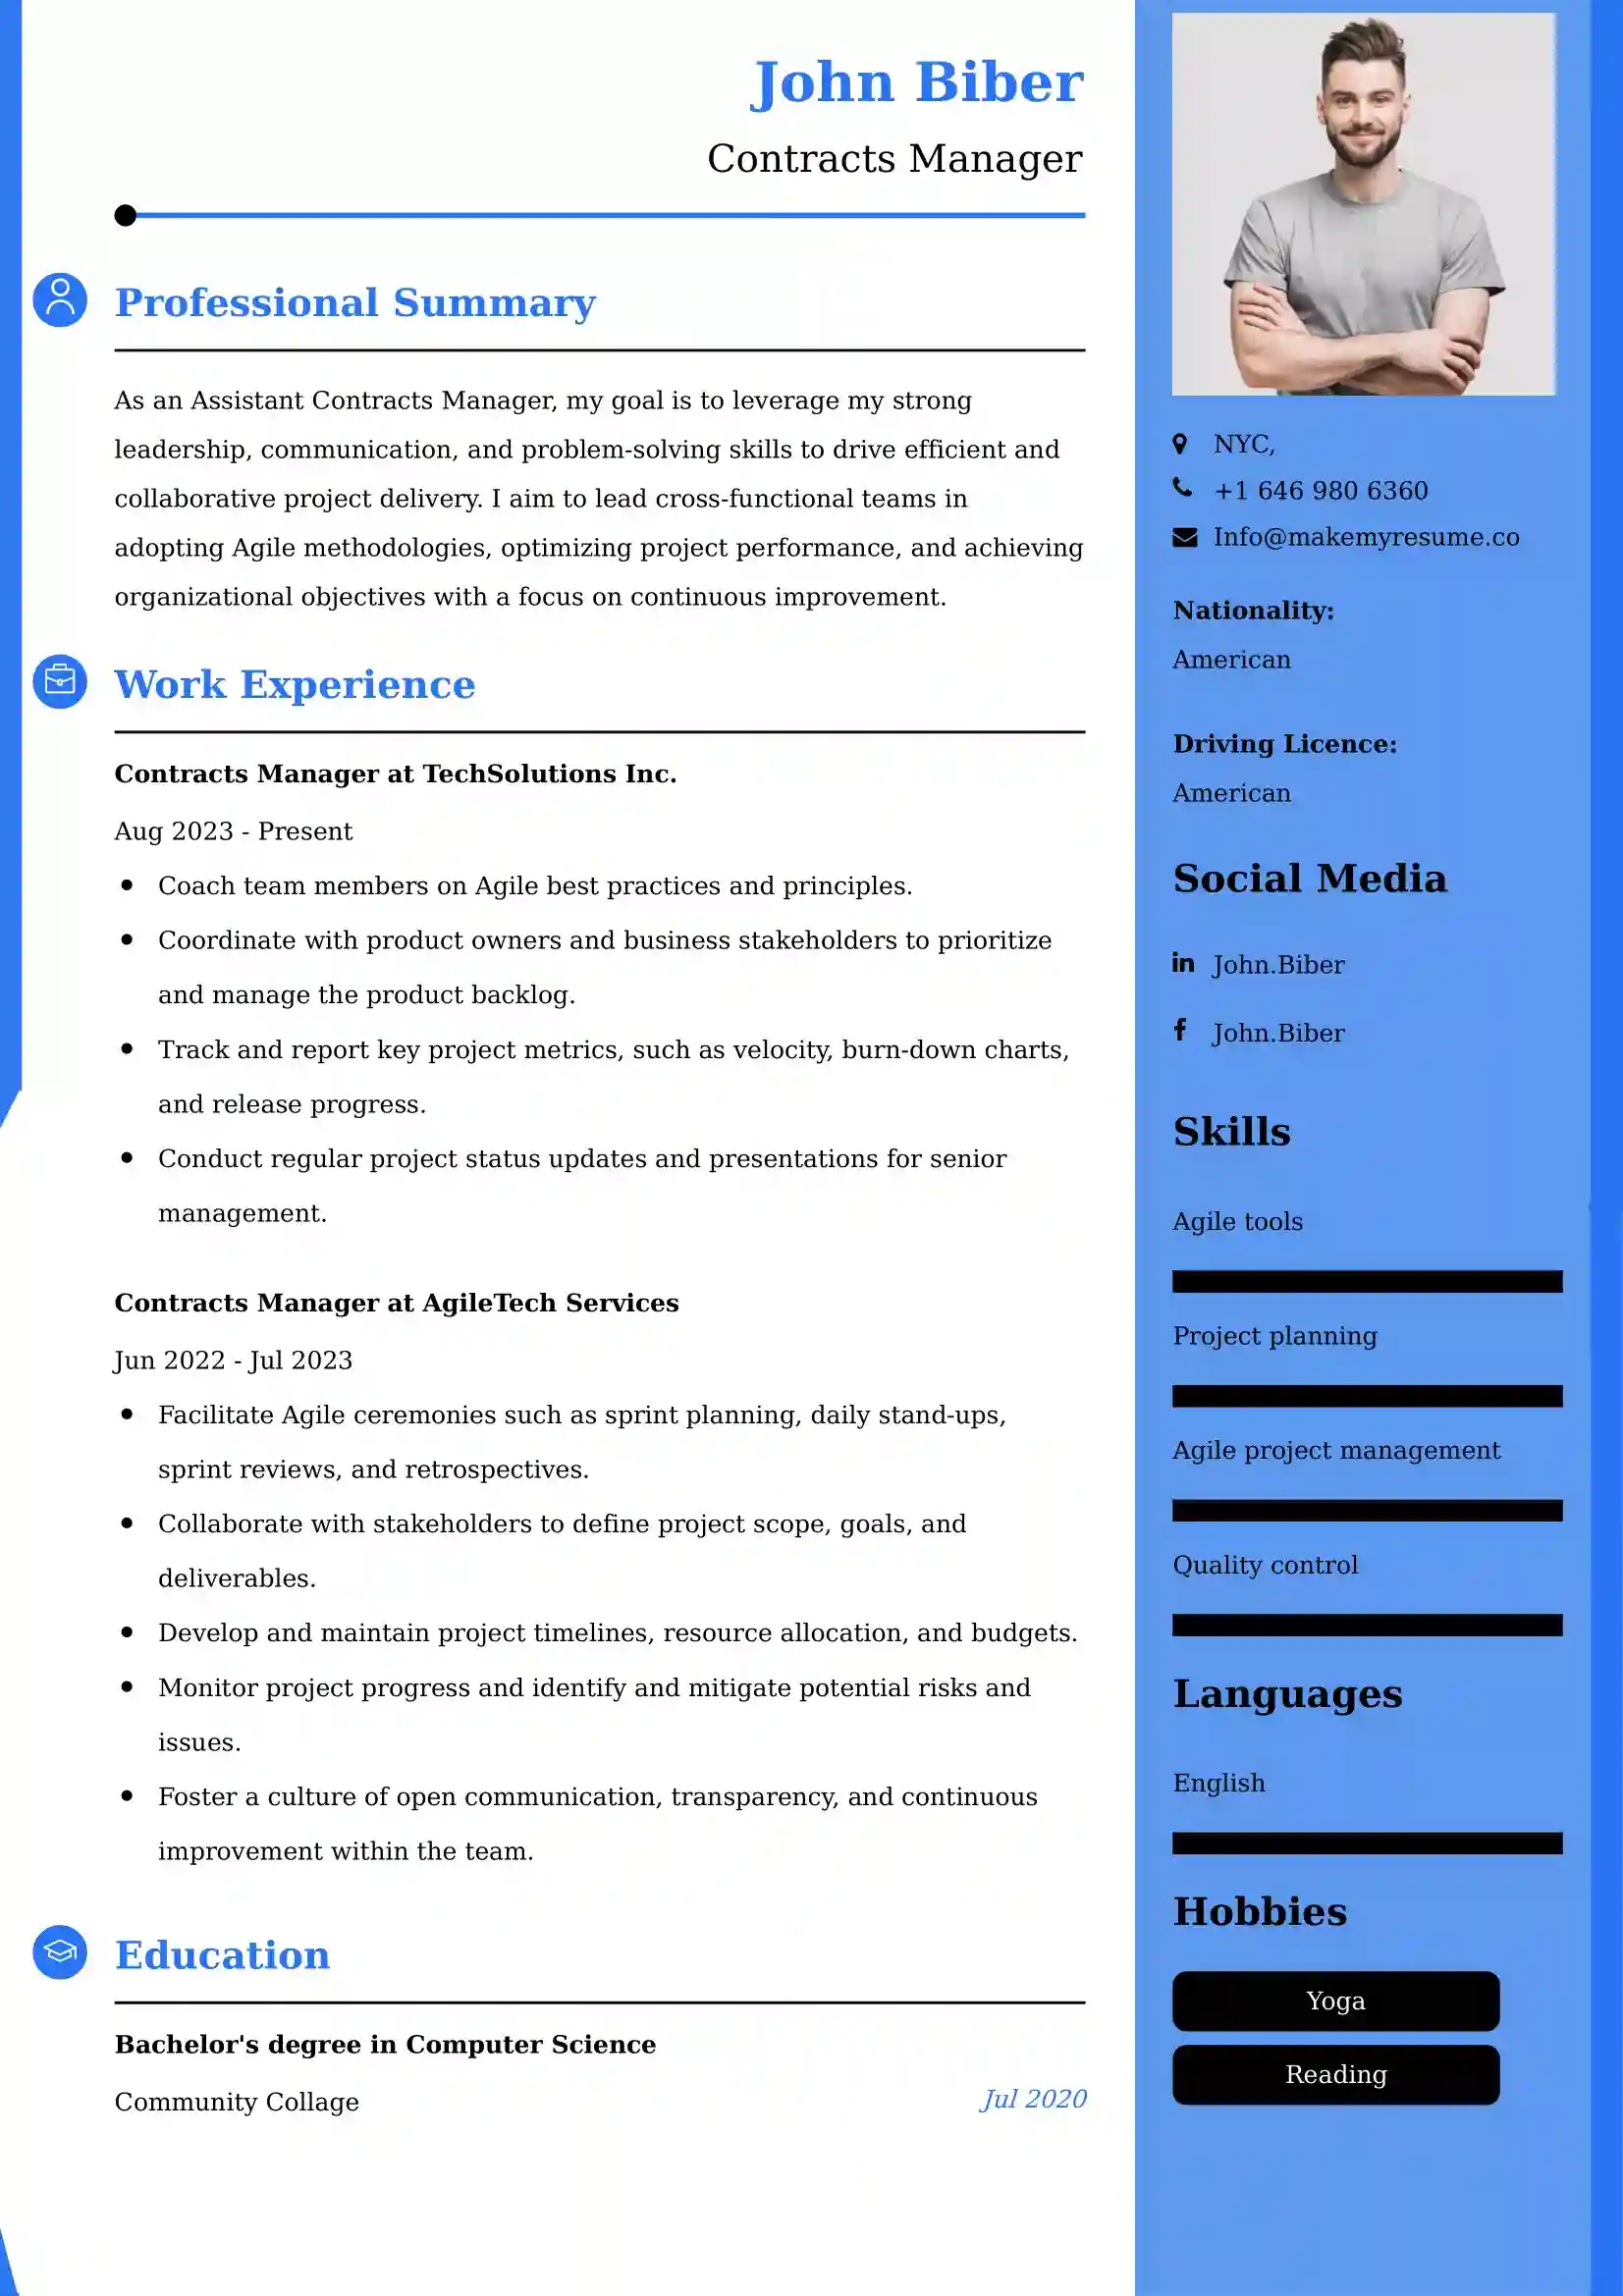 75+ Professional Information Technology Resume Examples, Latest Format